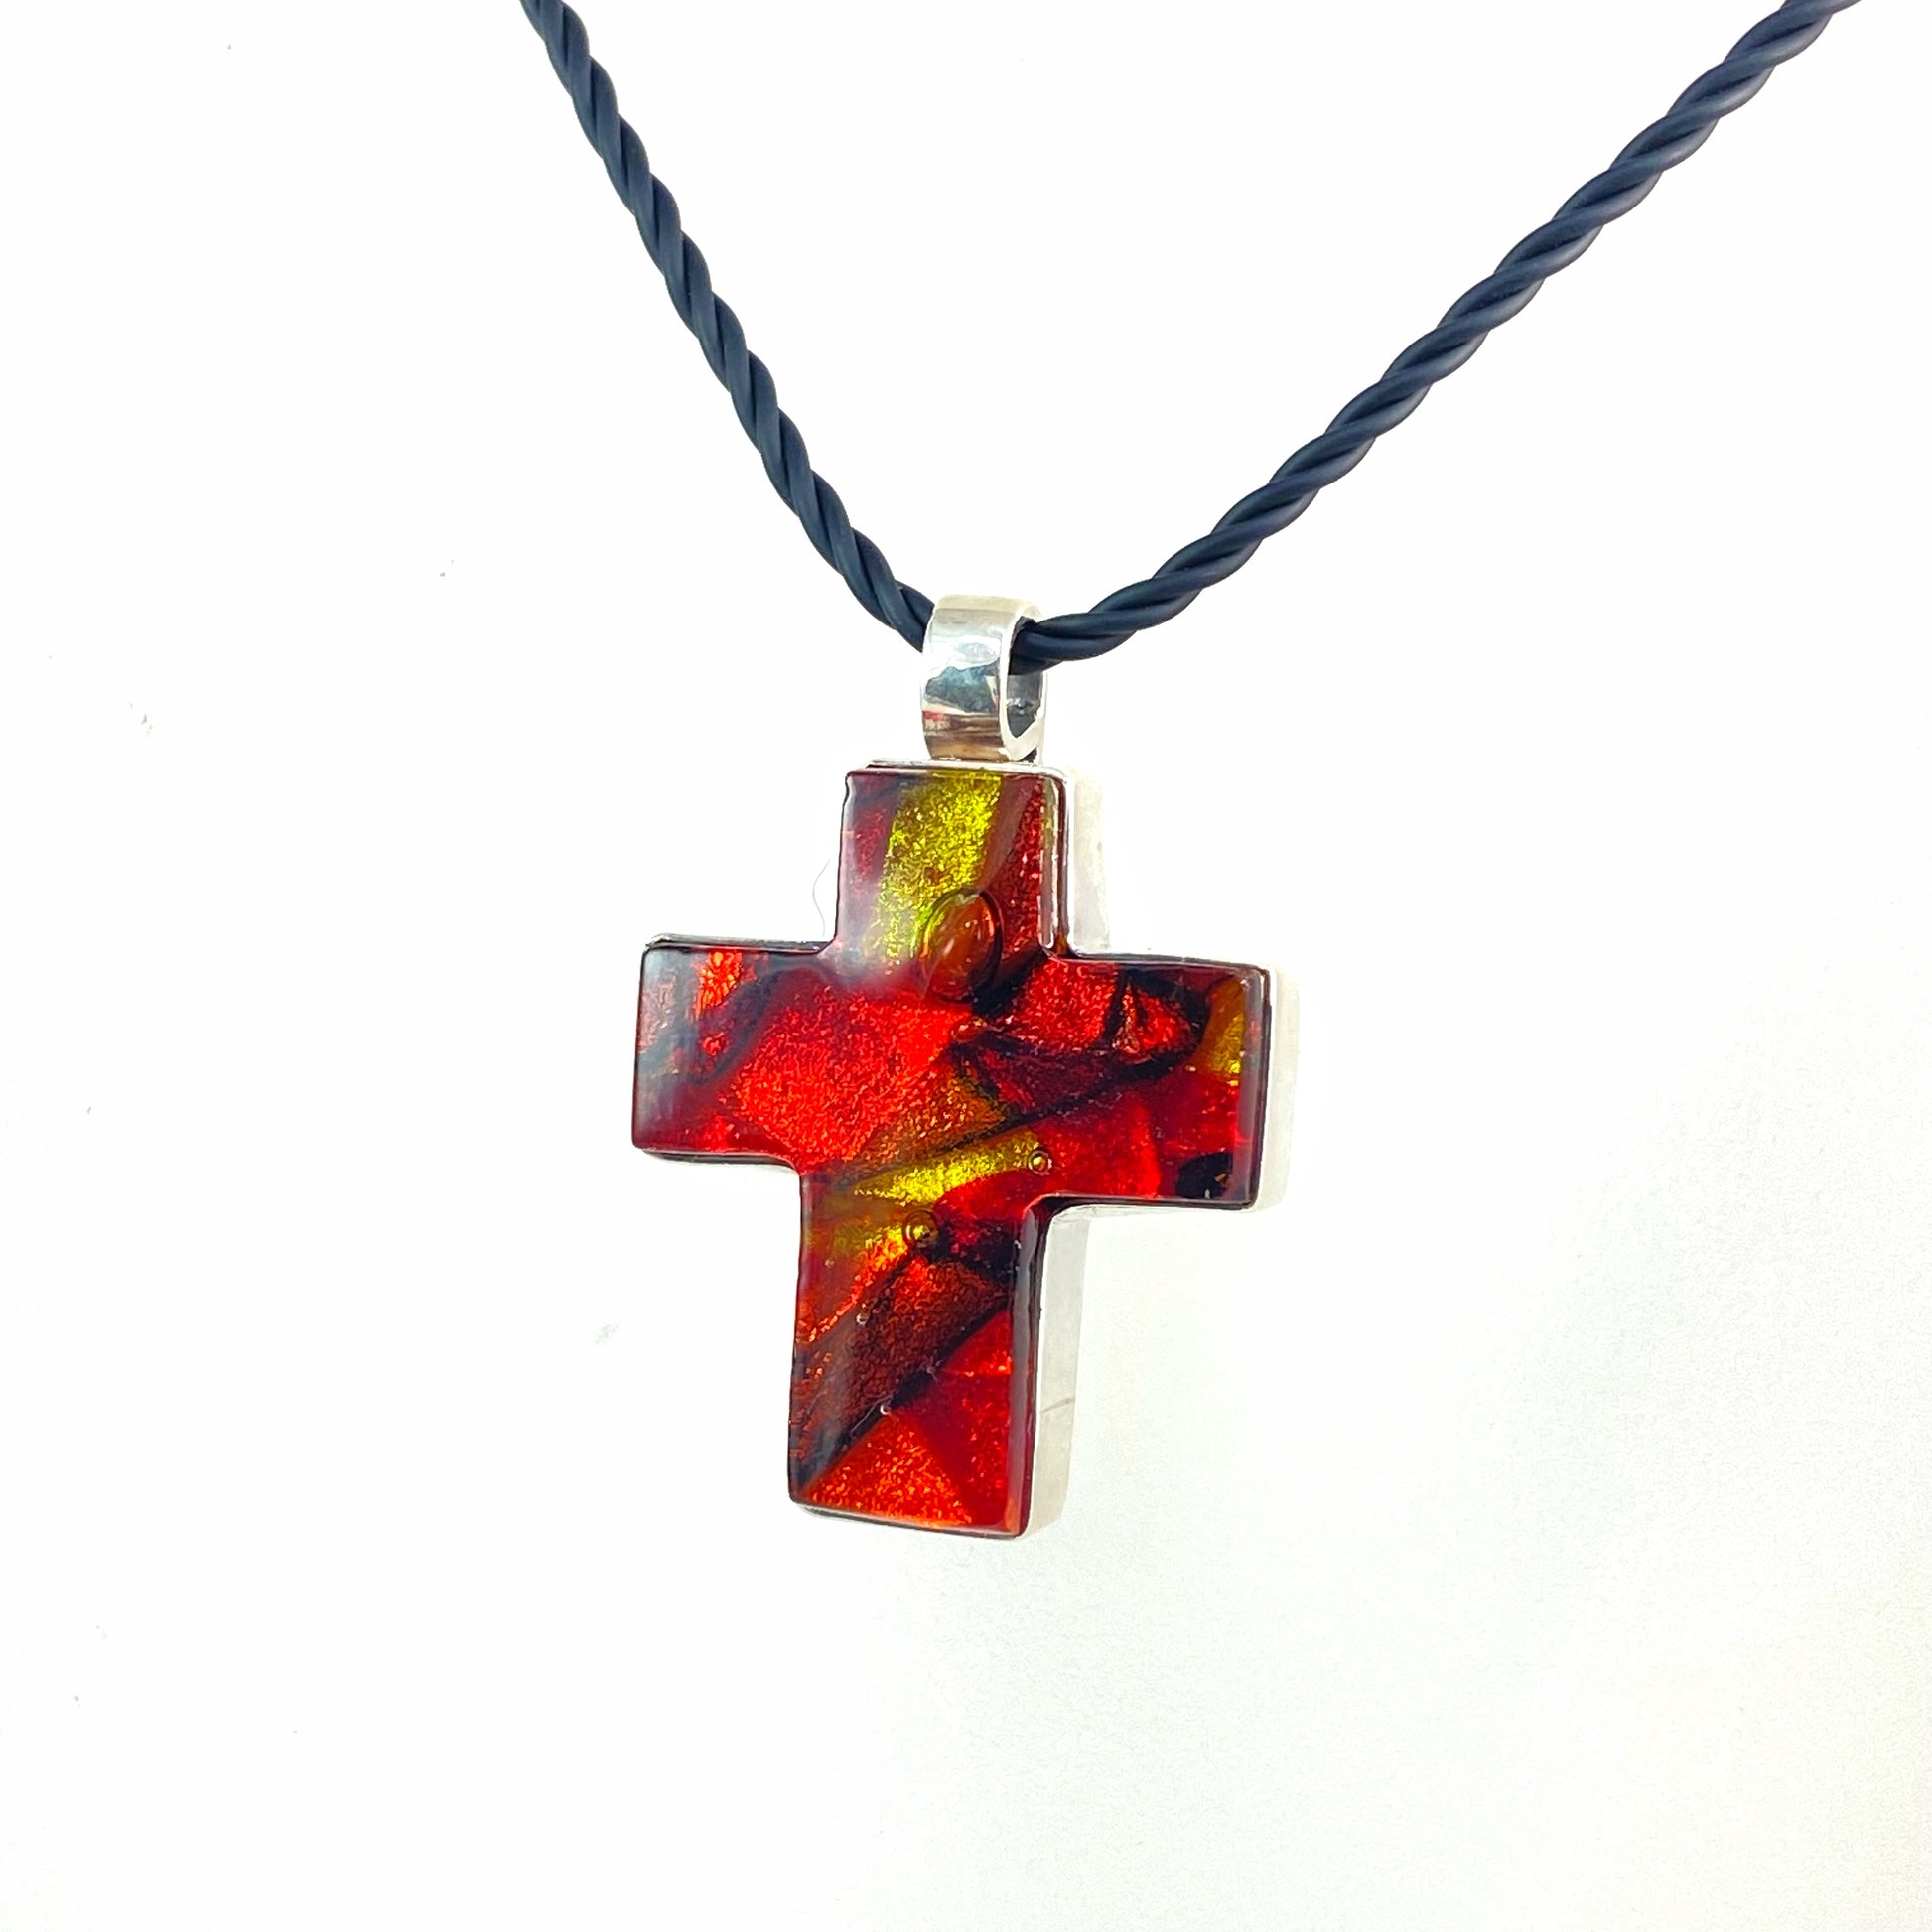 Sun melange mixture of red, gold and orange glass, ,fused glass  in a cross shape necklace, glass jewelry, glass and silver jewelry, handmade, handcrafted, American Craft, hand fabricated jewelry, hand fabricated jewellery, Athen, Georgia, colorful jewelry, sparkle, bullseye glass, dichroic glass, art jewelry